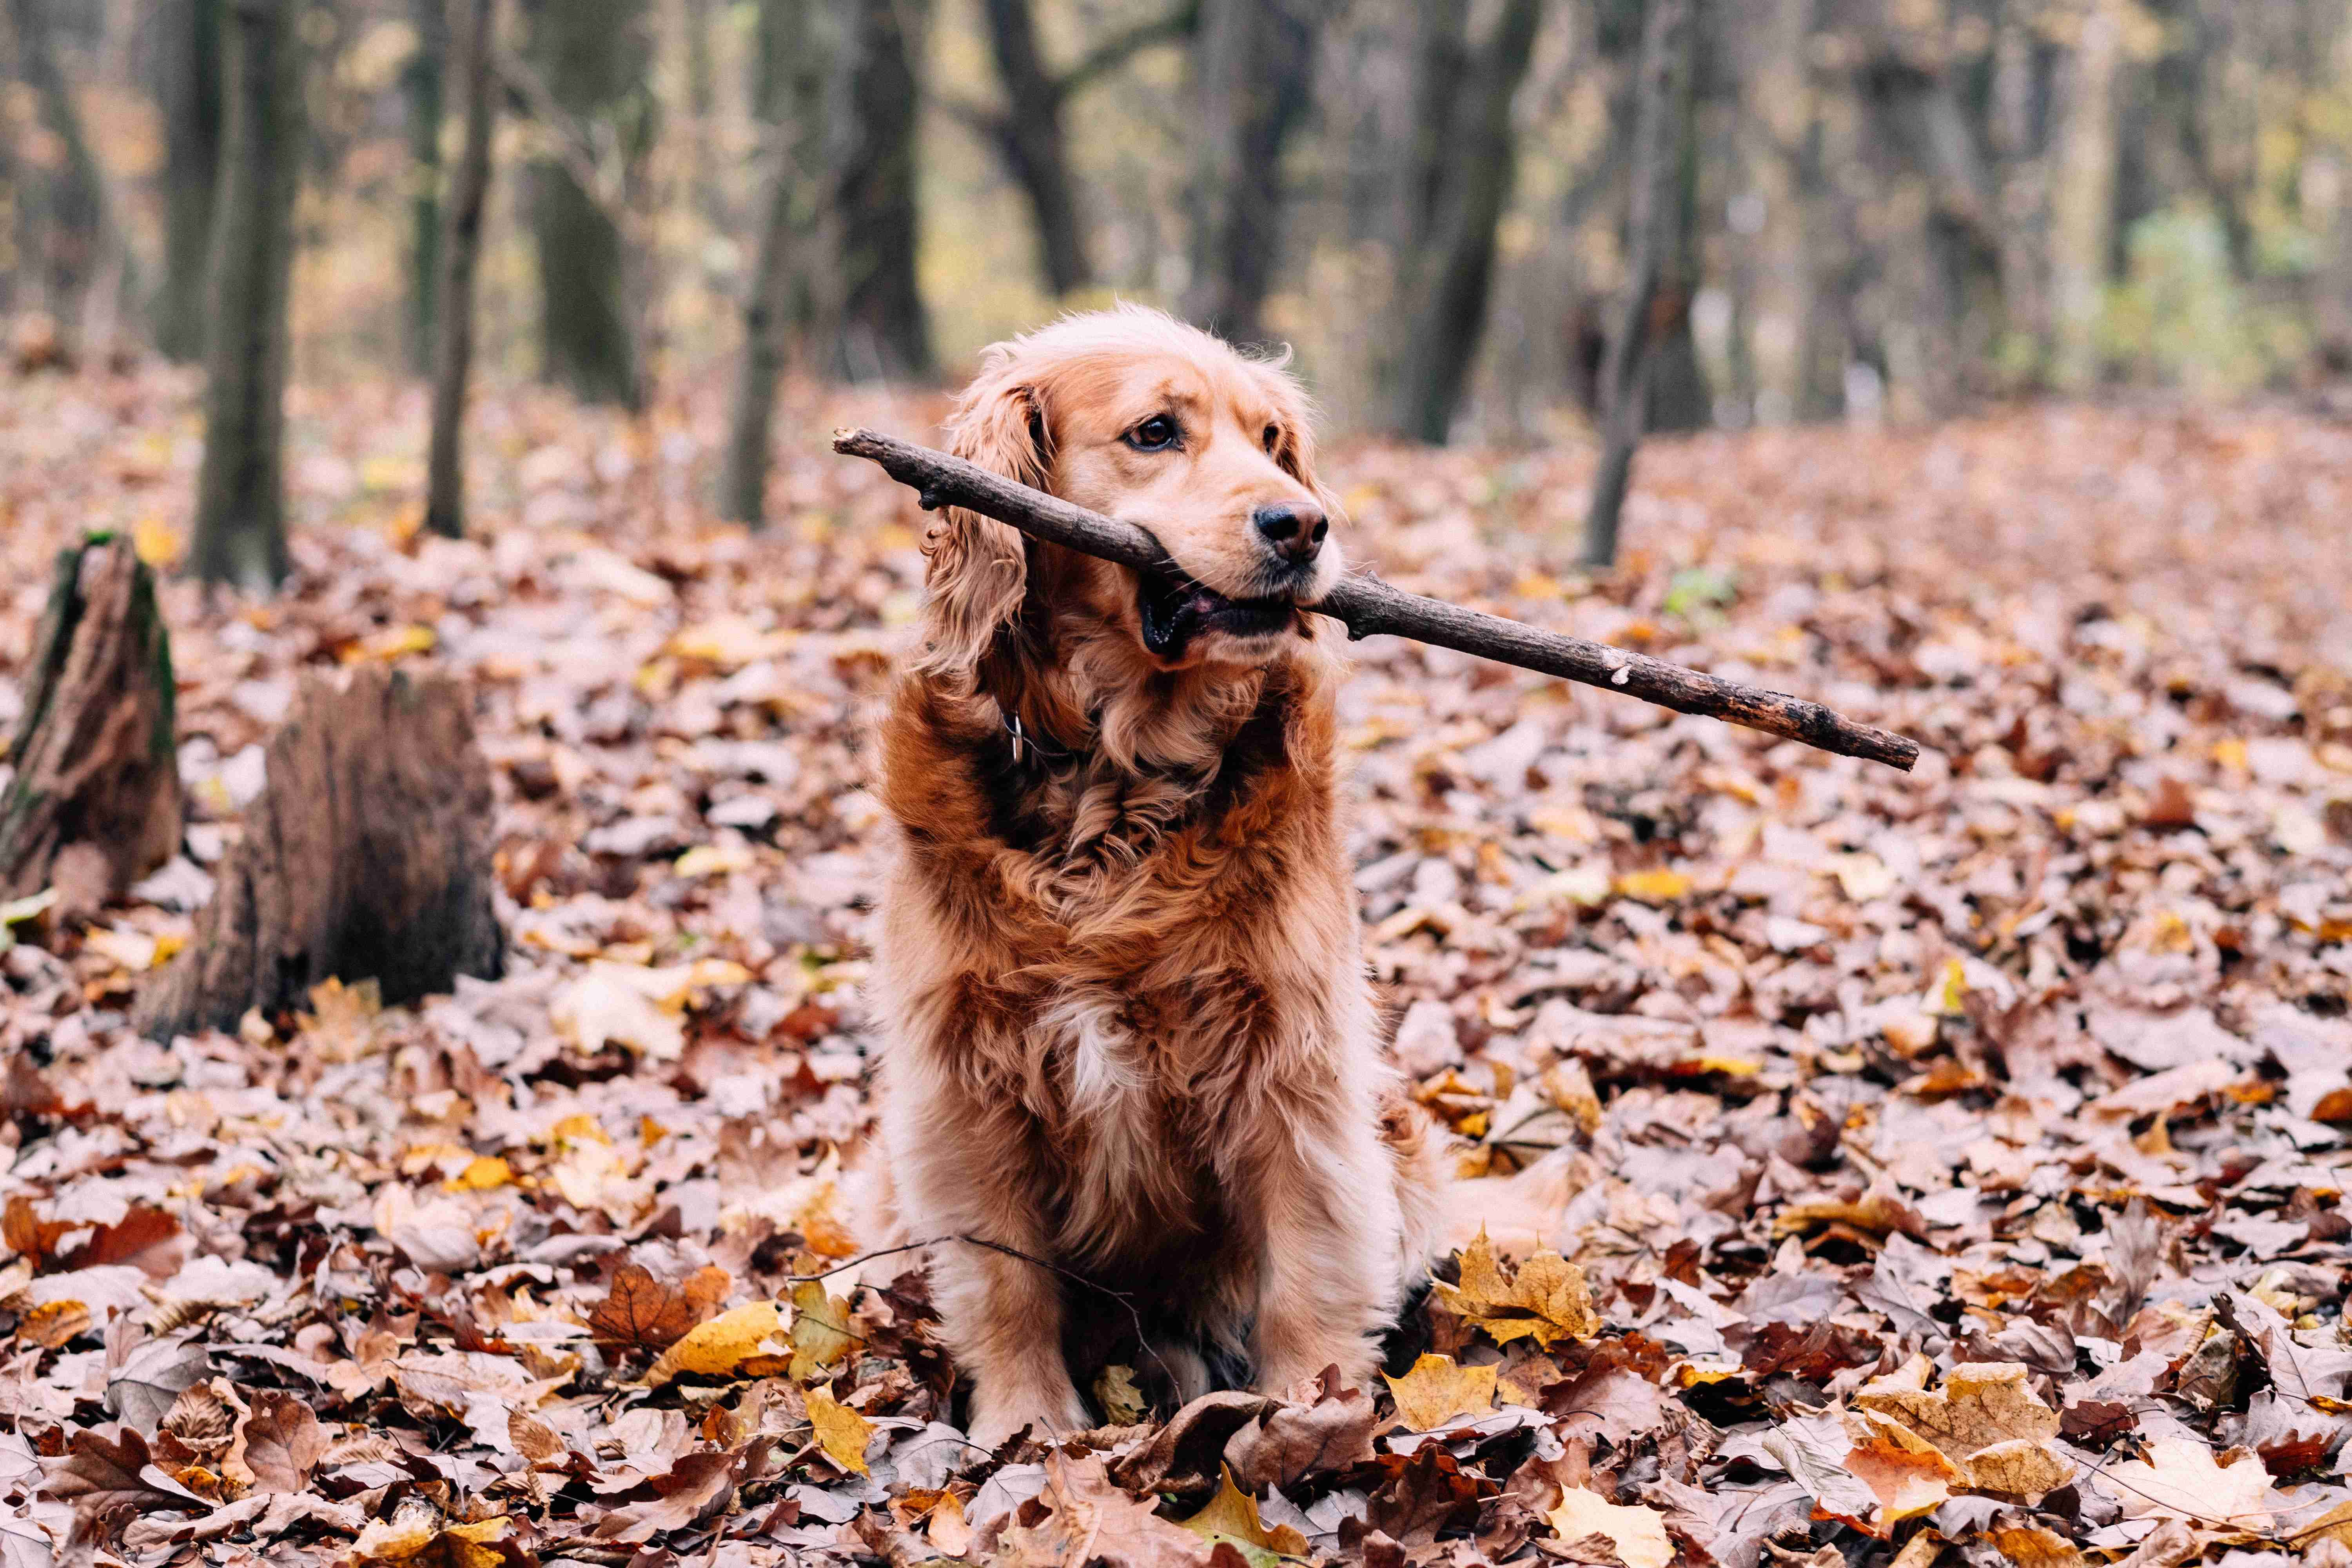 Grooming a Golden Retriever with Anxiety: Best Practices for a Stress-Free Session